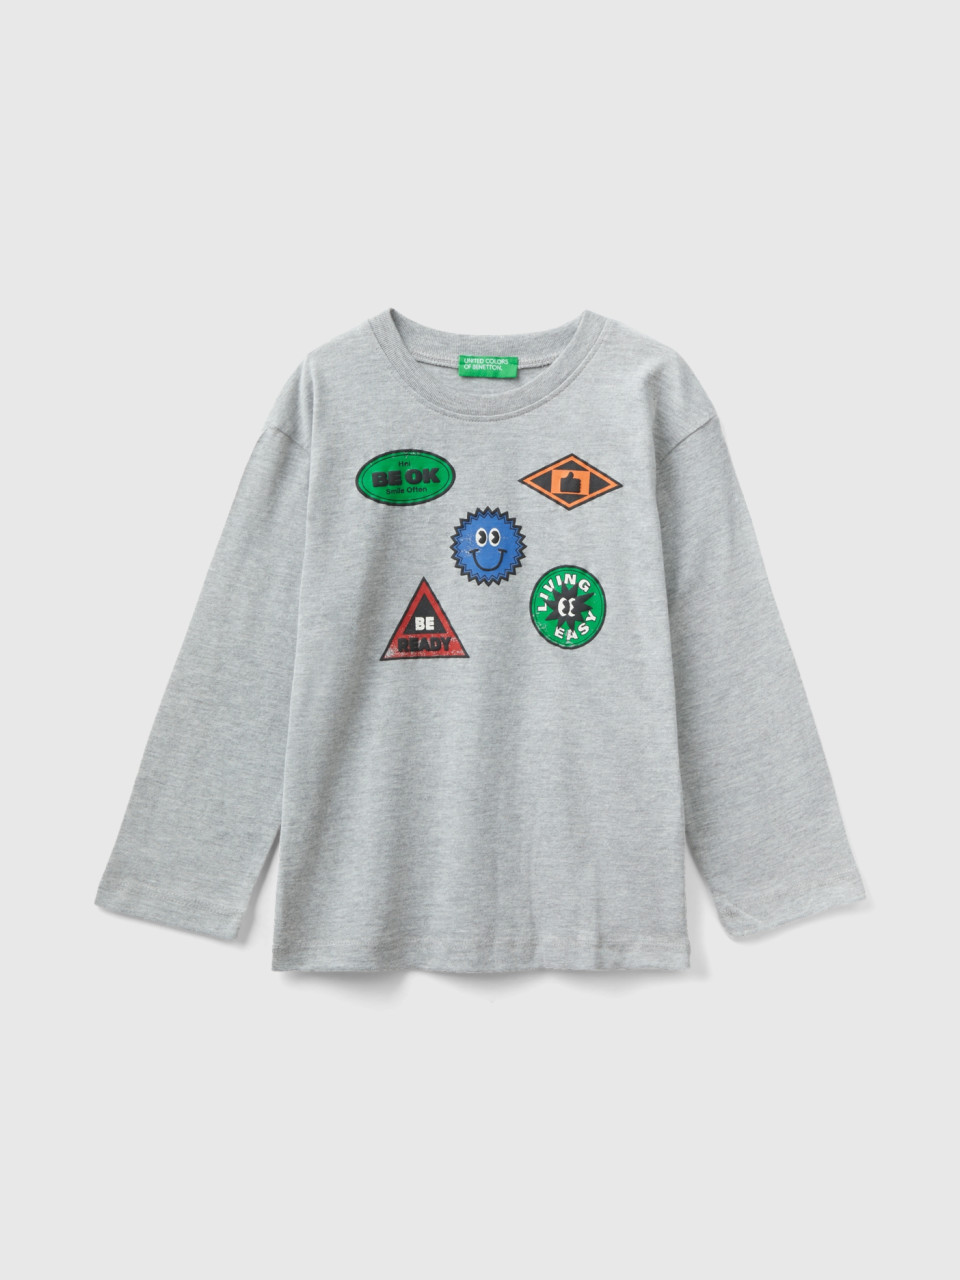 Benetton, T-shirt In Warm Cotton With Print, Light Gray, Kids